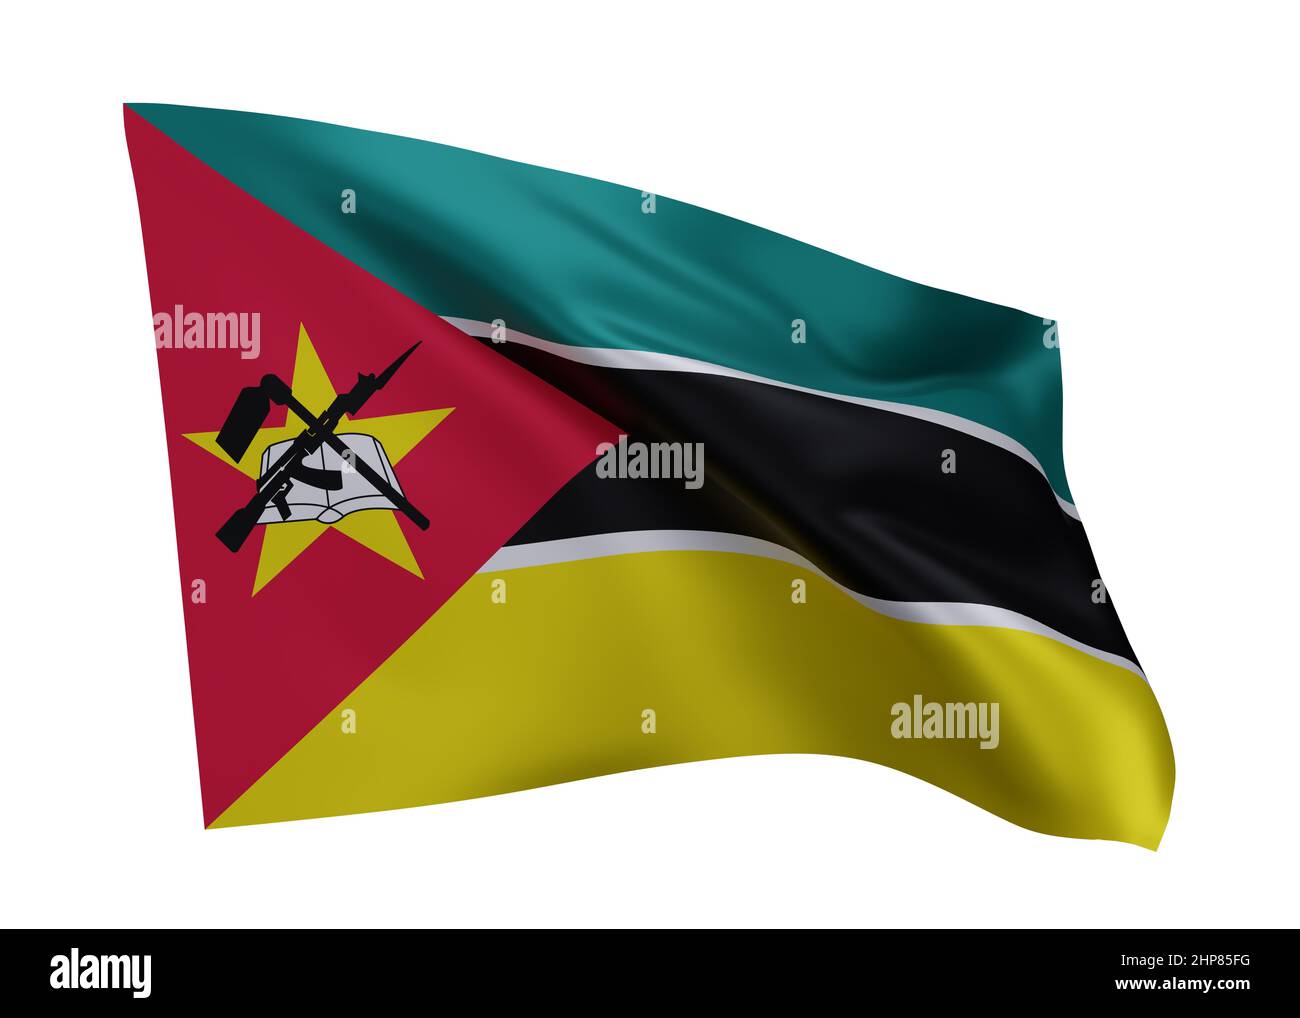 3d illustration flag of Mozambique. Mozambican high resolution flag isolated against white background. 3d rendering Stock Photo